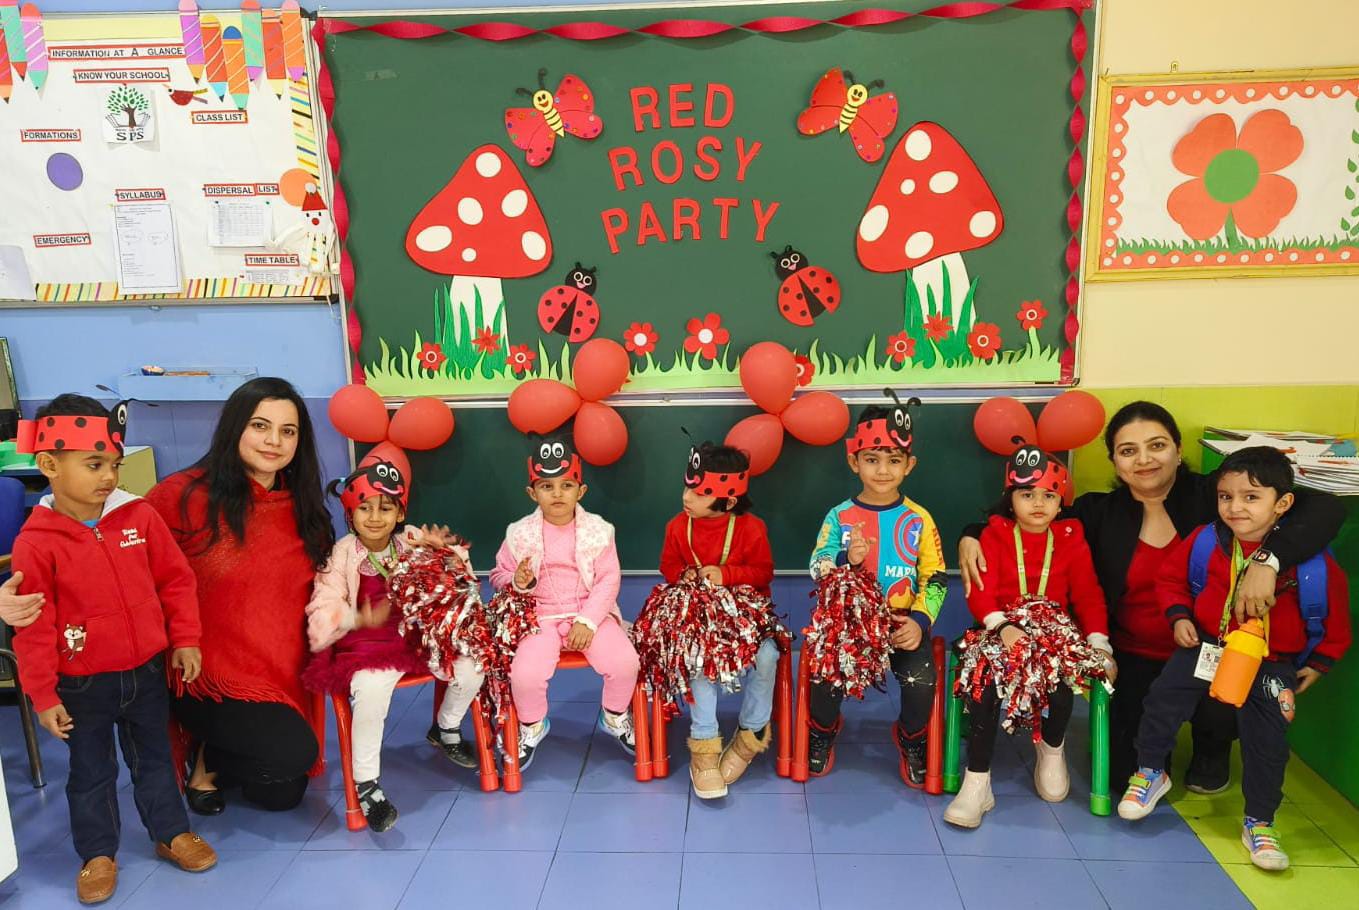 Red Rosy party Class Nursery